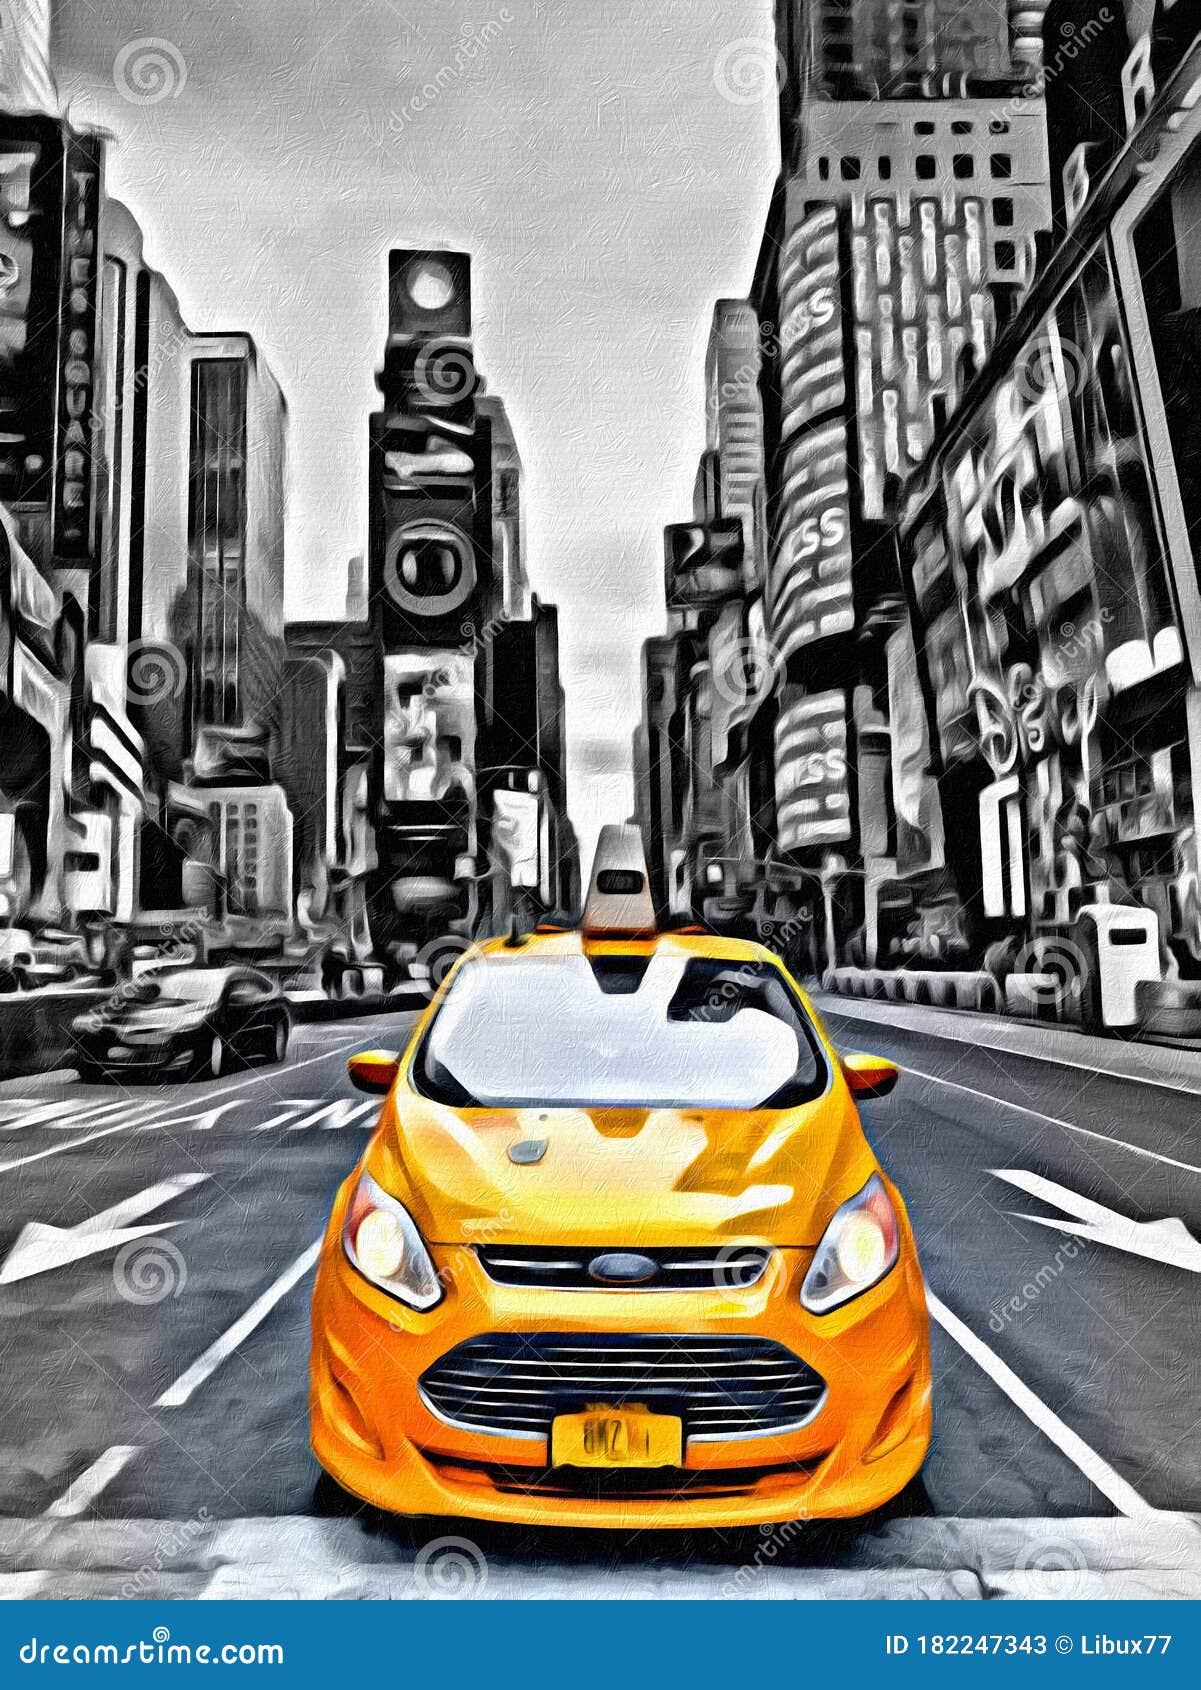 yellow taxi in black and white times square manhattan new york city usa artistic painting brushed